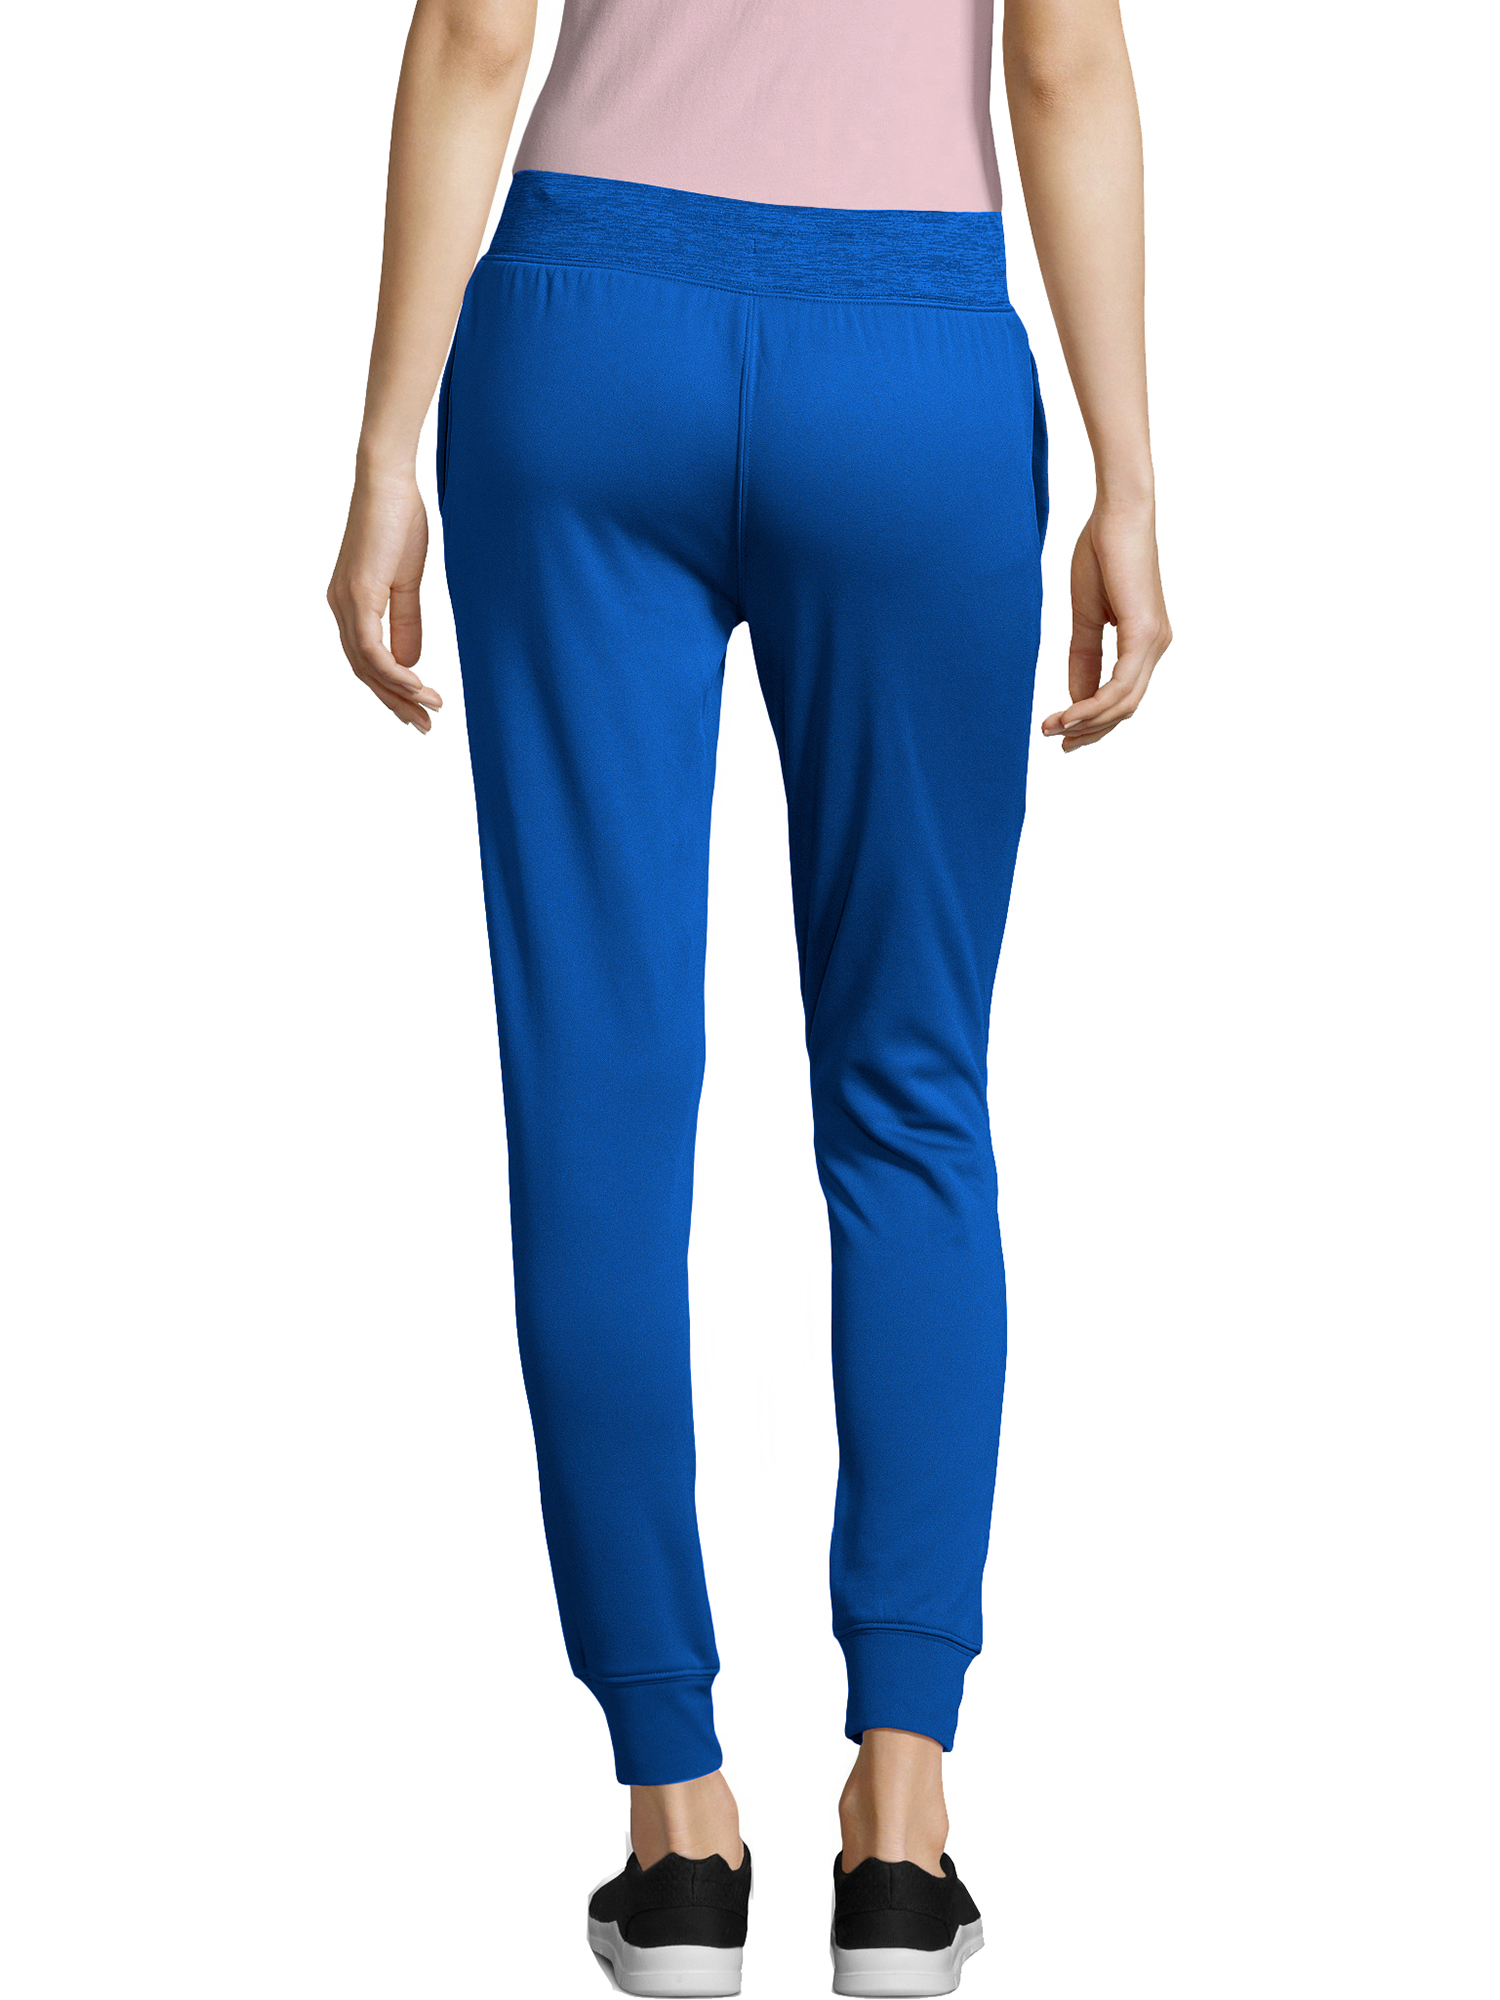 Hanes Sport Women's Performance Fleece Jogger Pants with Pockets - image 2 of 5